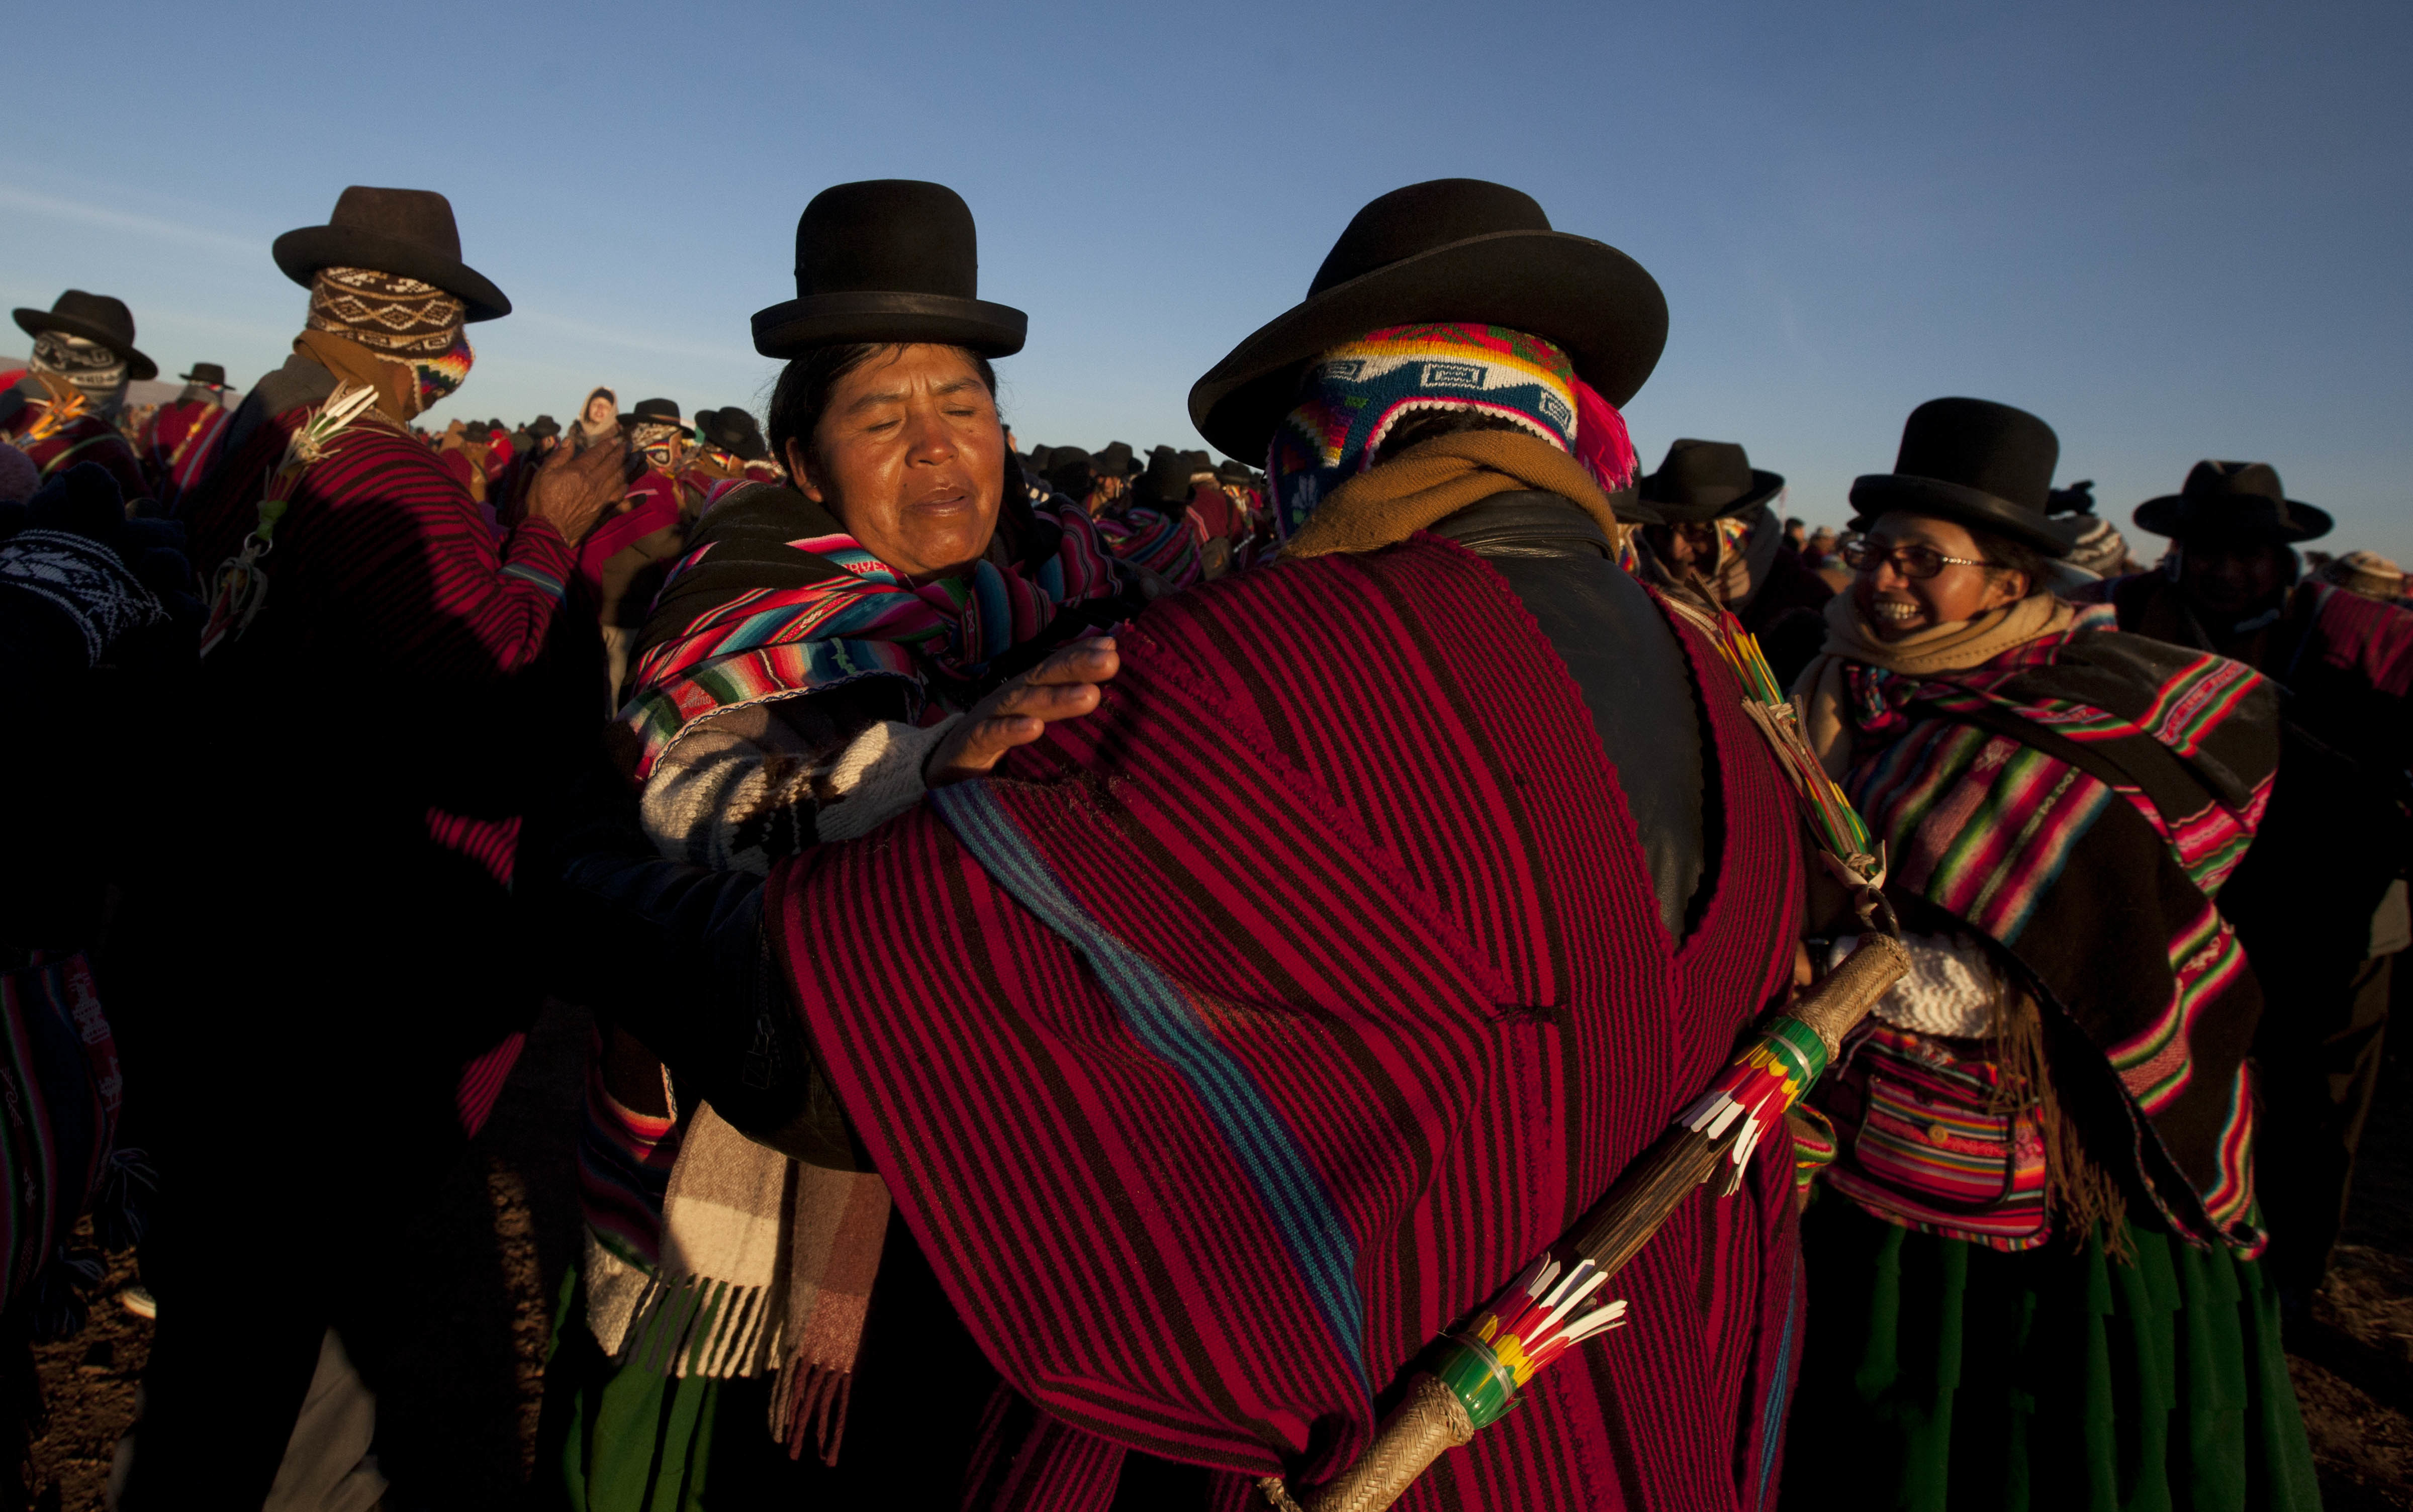 Aymara Indians embrace while receiving the first rays of sunlight in a New Year's ritual at the ruins of the ancient city Tiwanaku, Bolivia, early Wednesday, June 21, 2017. Bolivia's Aymara Indians are celebrating the year 5,525 as well as the Southern Hemisphere's winter solstice, which marks the start of a new agricultural cycle. (AP Photo/Juan Karita)